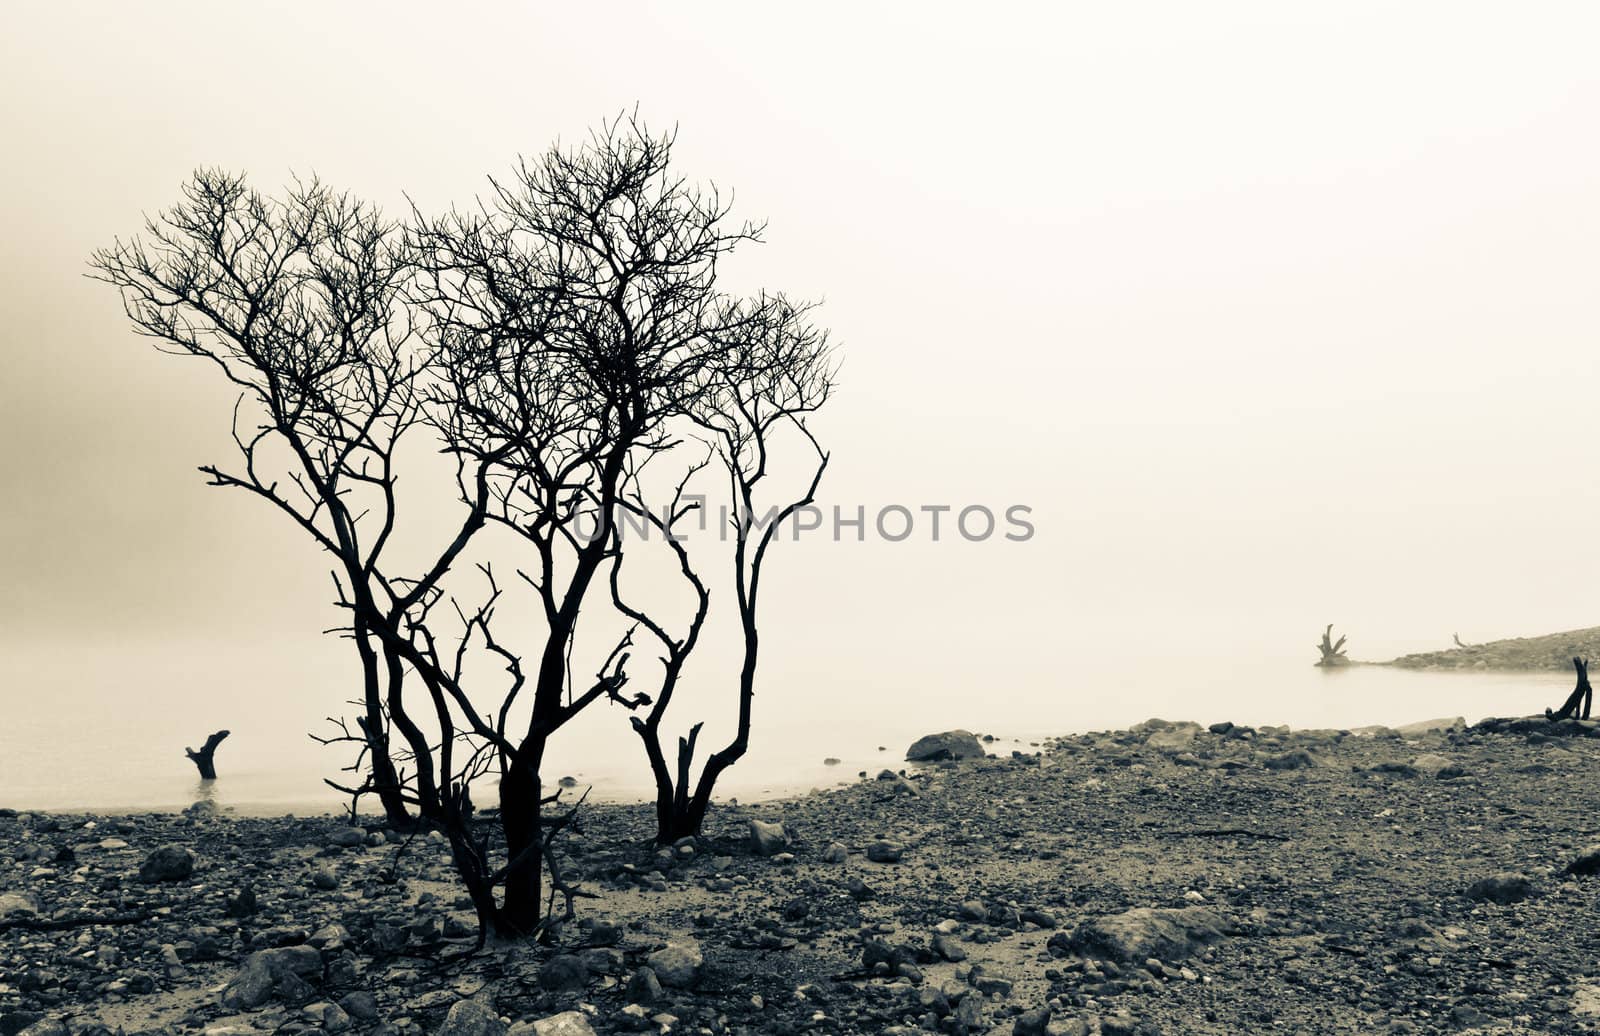 dead trees at the edge of volcanic crater lake of Kawah Putih, Bandung Indonesia in splitted tone